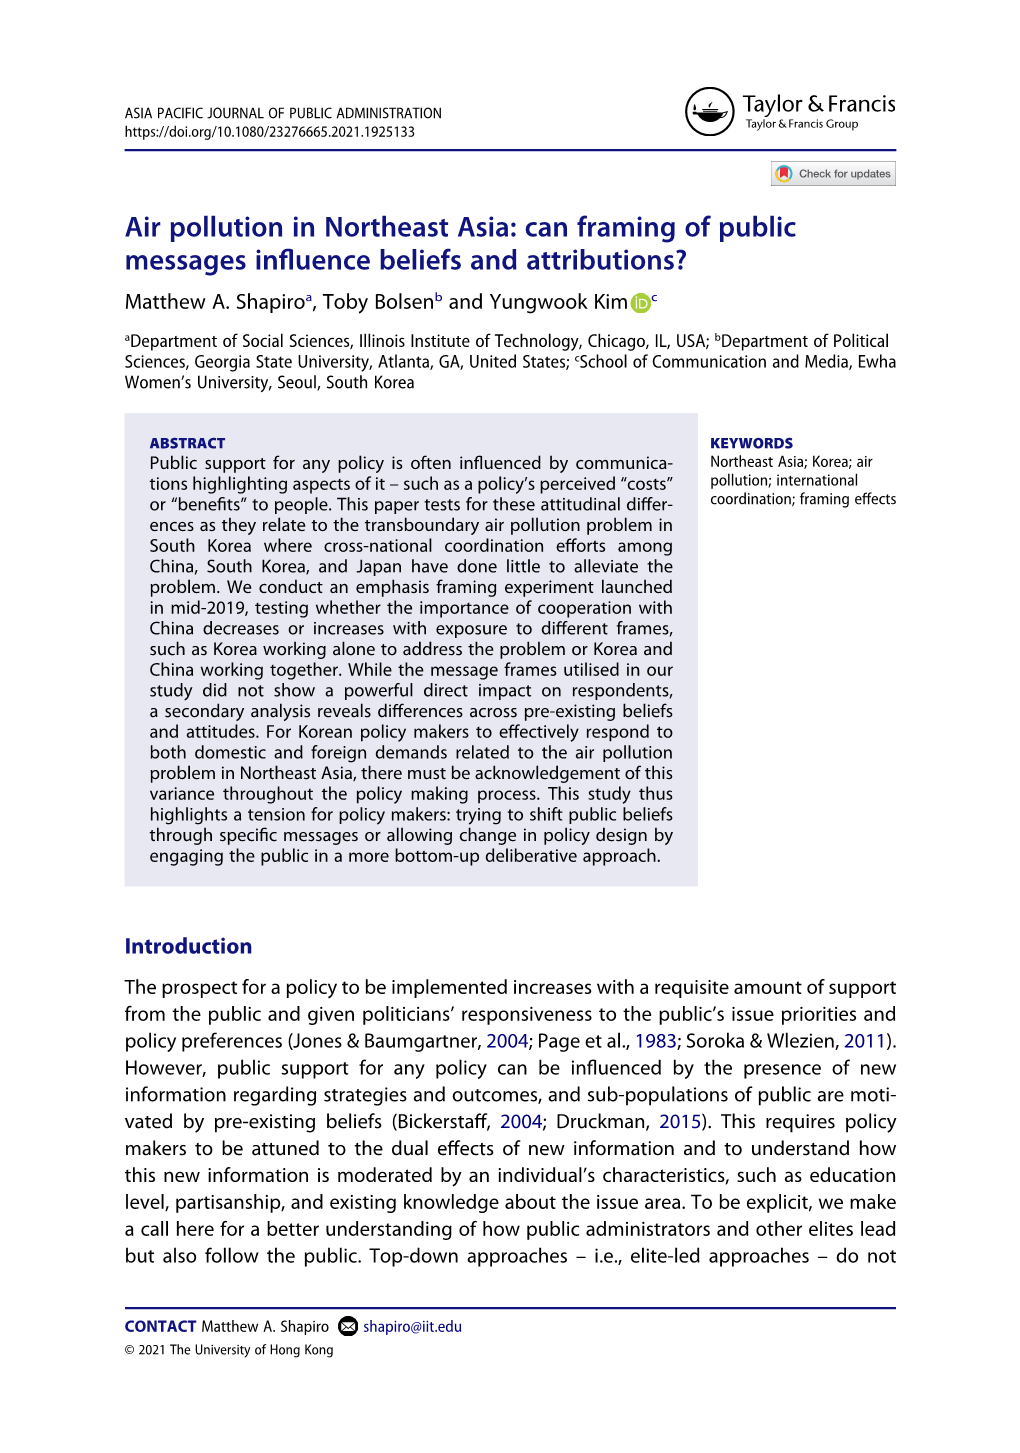 Air Pollution in Northeast Asia: Can Framing of Public Messages Influence Beliefs and Attributions? Matthew A